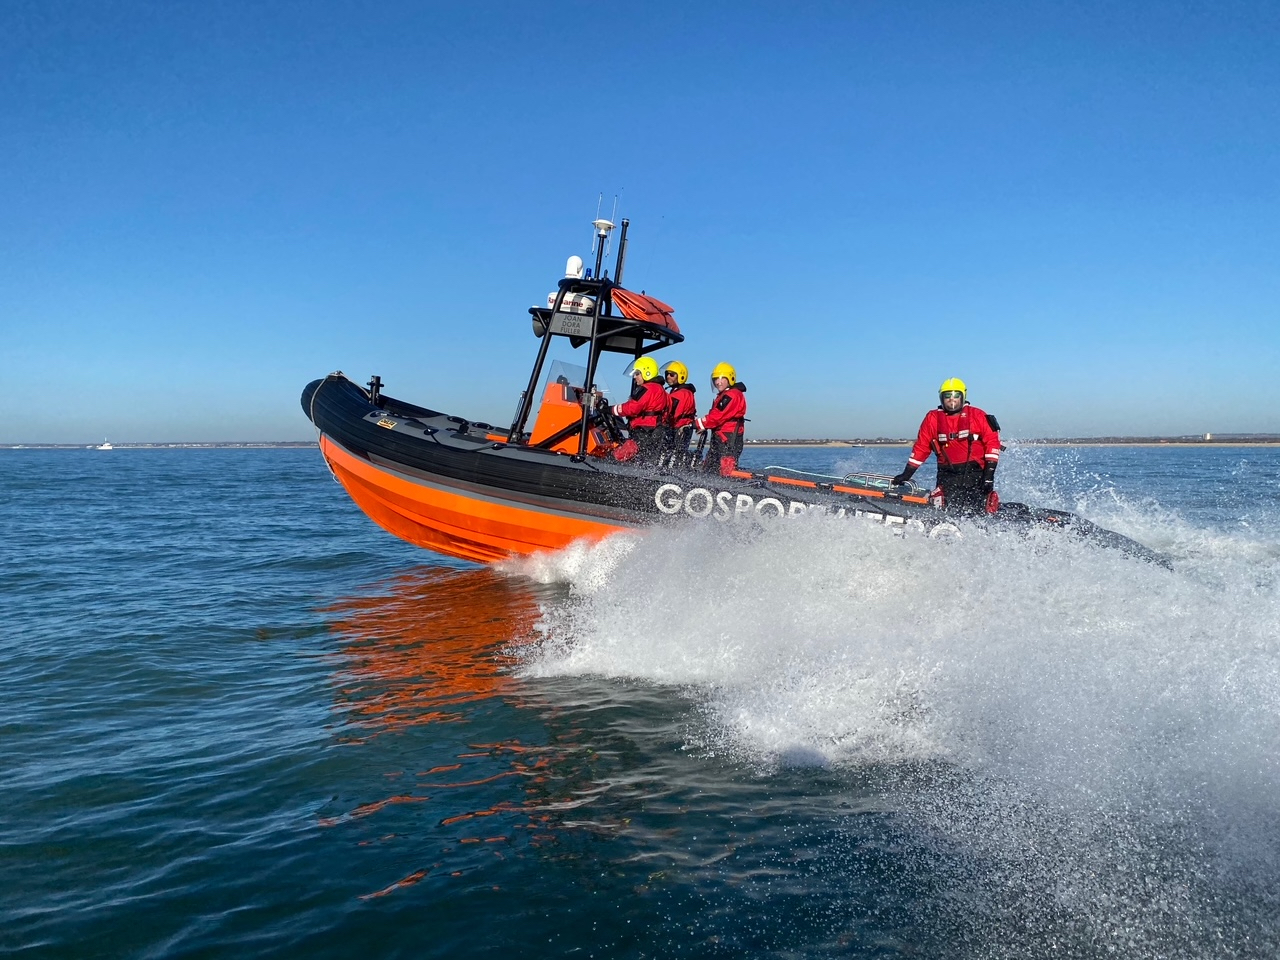 Gosport lifeboat station issues warning after 'busiest start to a month  ever' - Marine Industry News